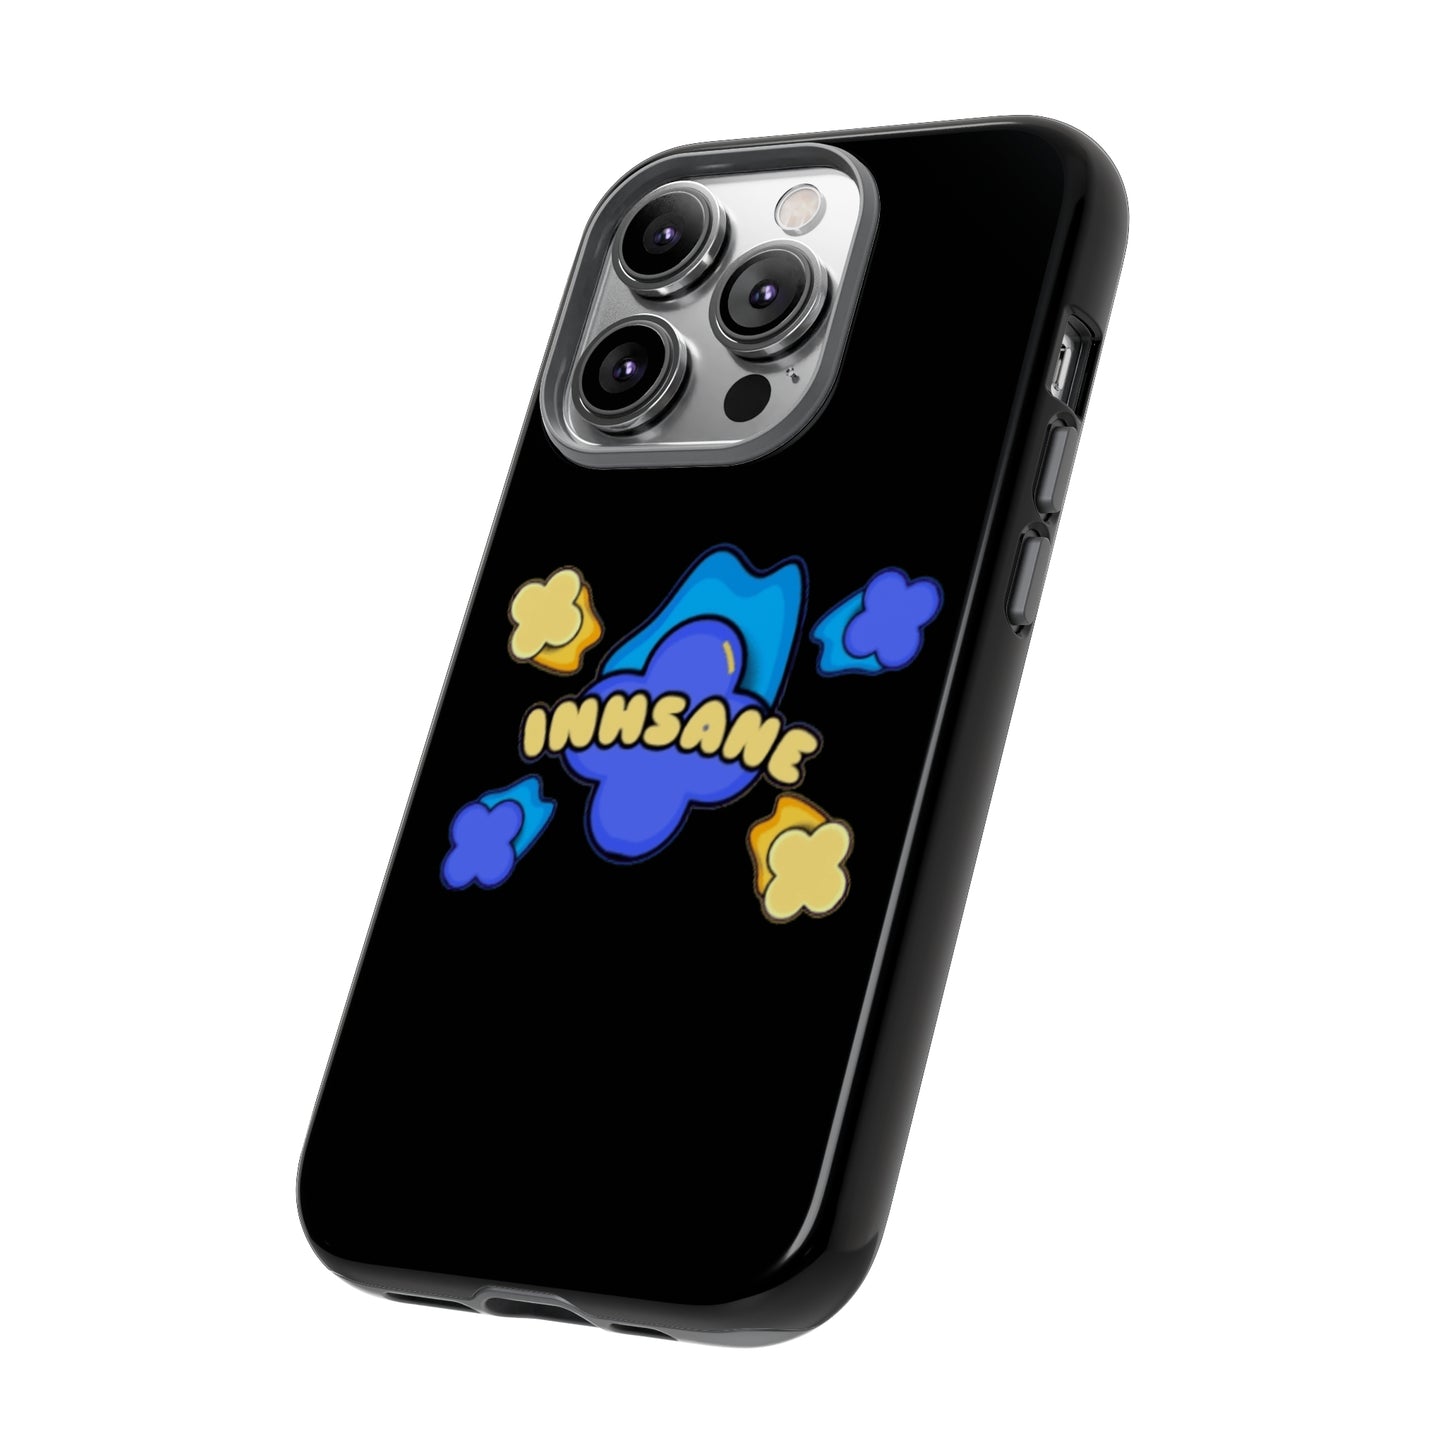 inhsane legacy v2 phone case (ALL IPHONES, ALL SAMSUNG S SERIES, ALL GOOGLE PIXELS)